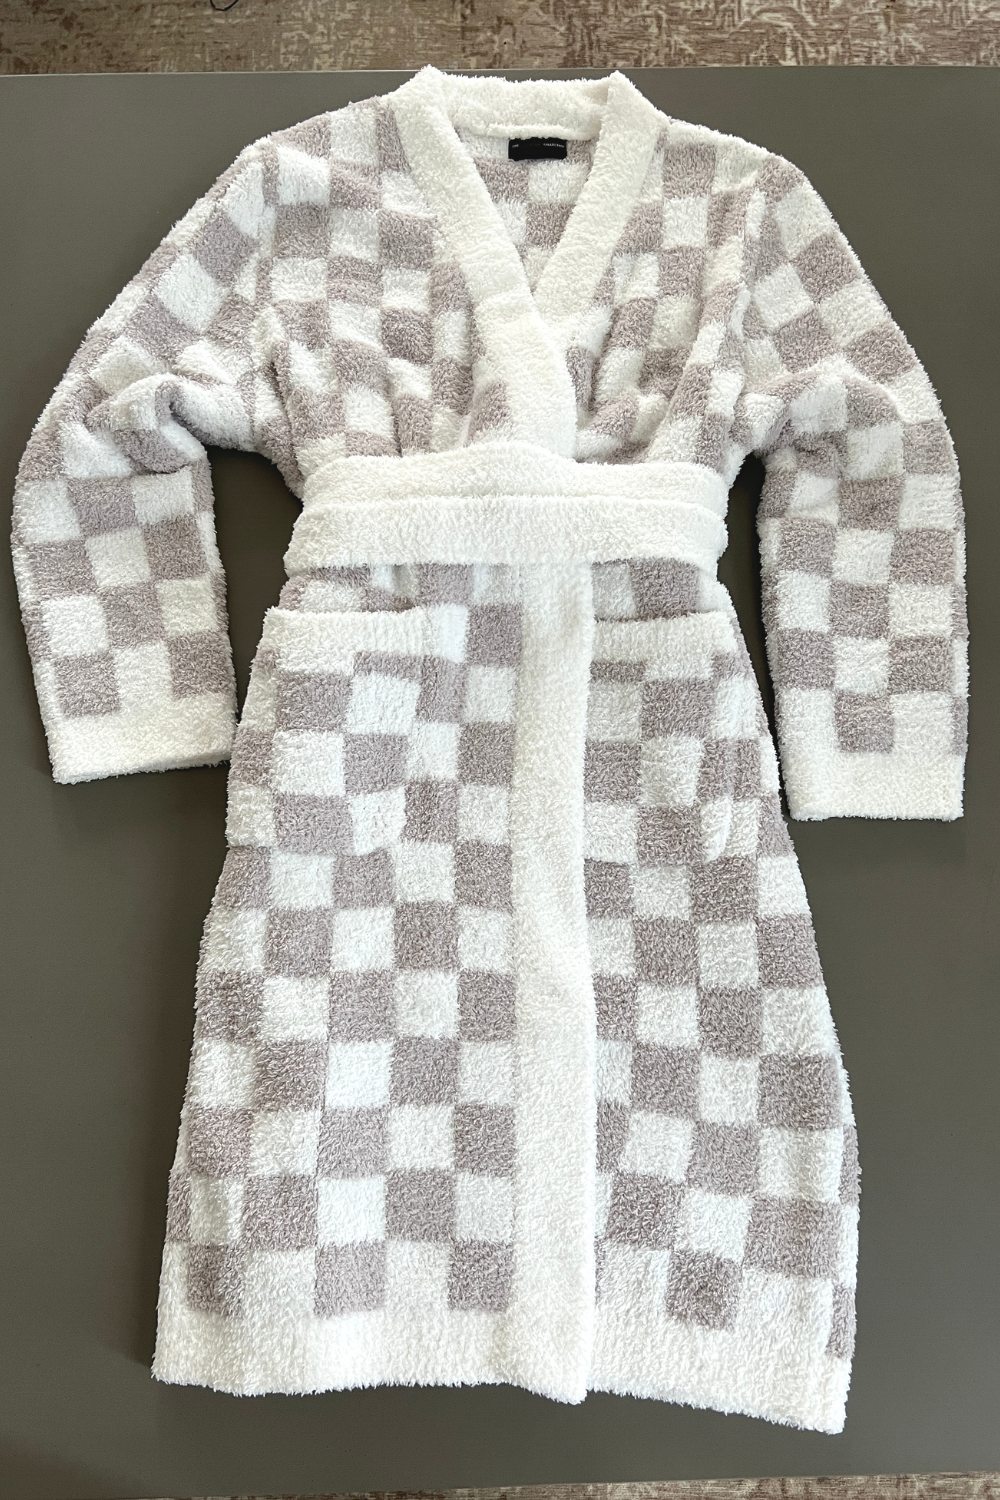 Checkered Buttery Robe L/XL / Light Grey and White with White Border